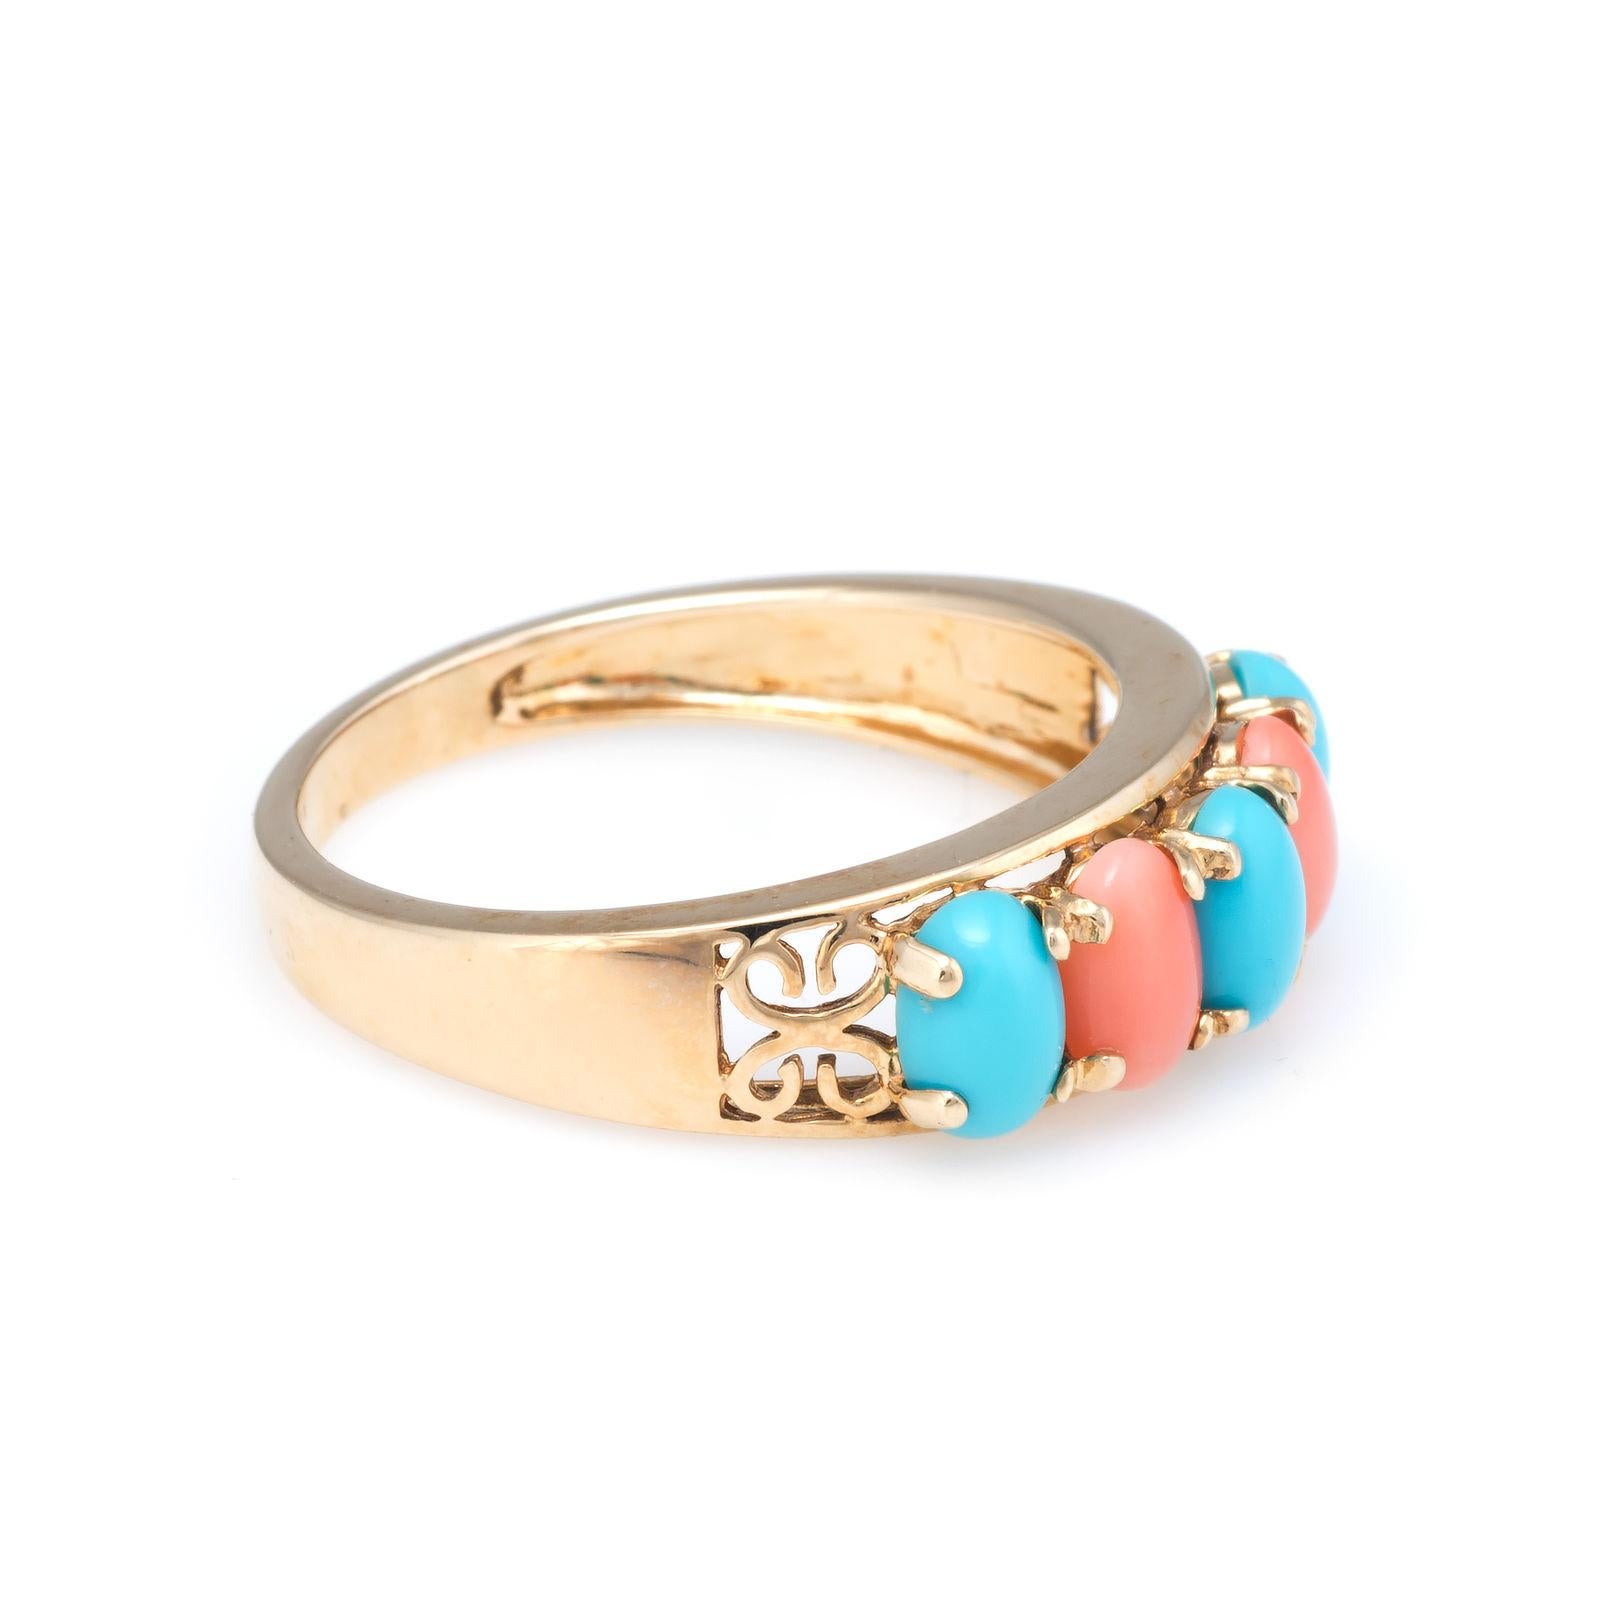 Elegant vintage turquoise & coral ring, crafted in 14 karat yellow gold. 

Cabochon cut turquoise and coral each measure 6mm x 4mm (estimated at 0.50 carats each - 2.50 carats total estimated weight). The turquoise & coral is in excellent condition